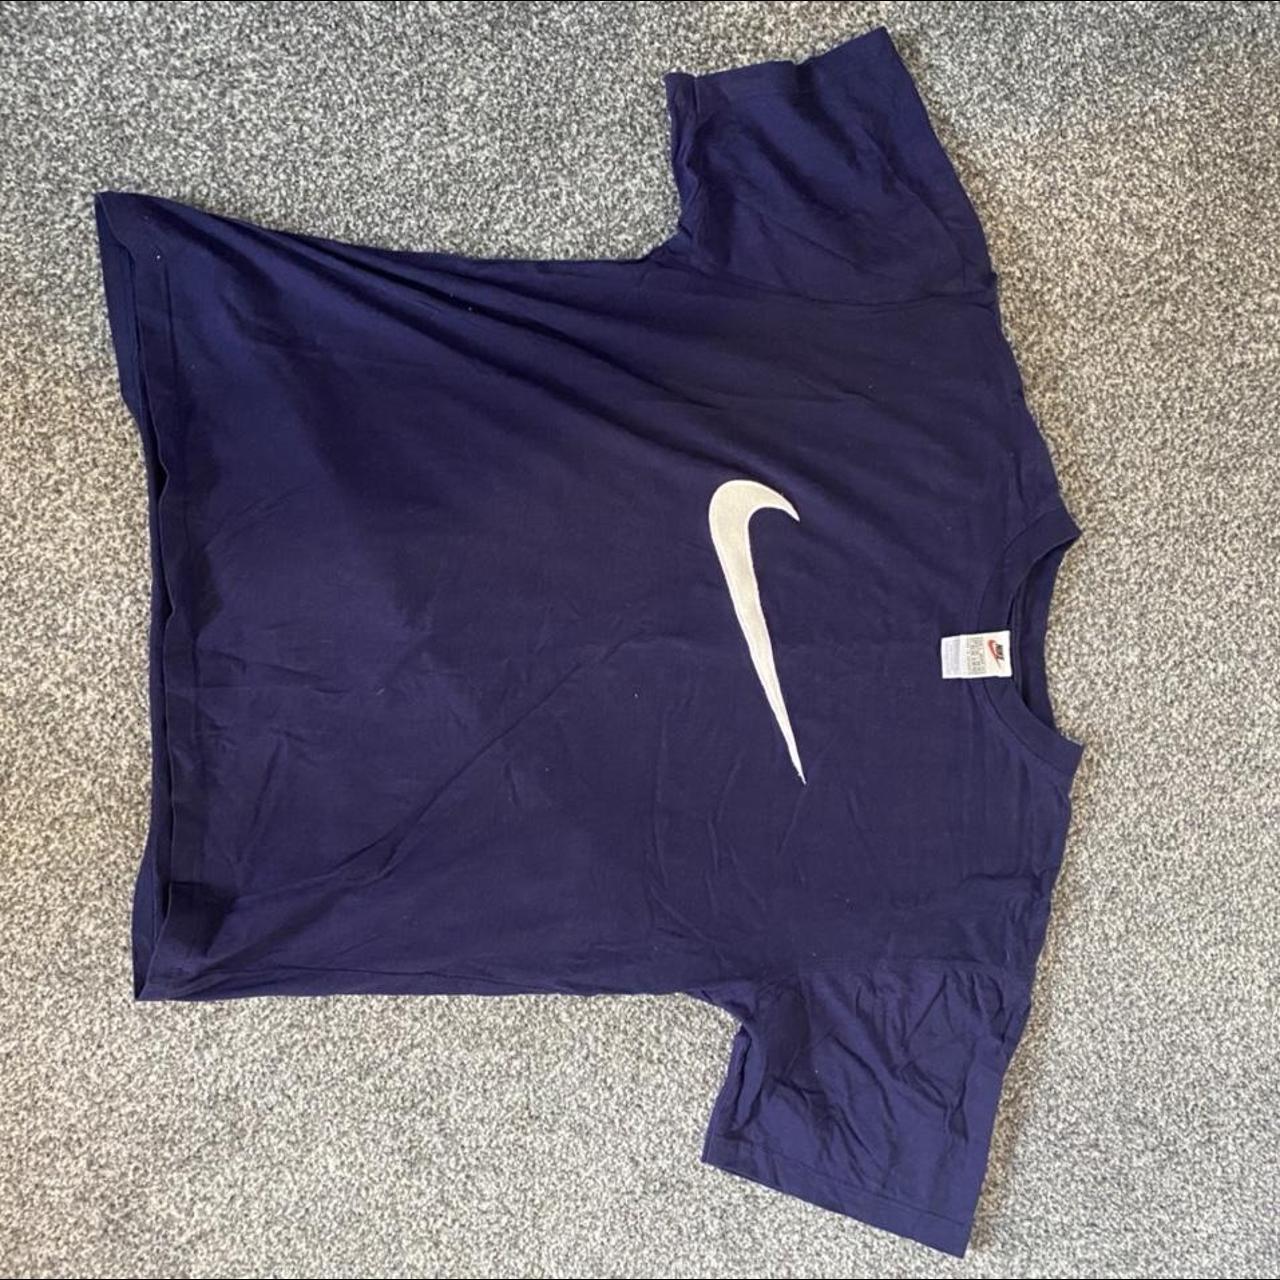 Vintage Nike T-shirt with embroidered wool swoosh.... - Depop